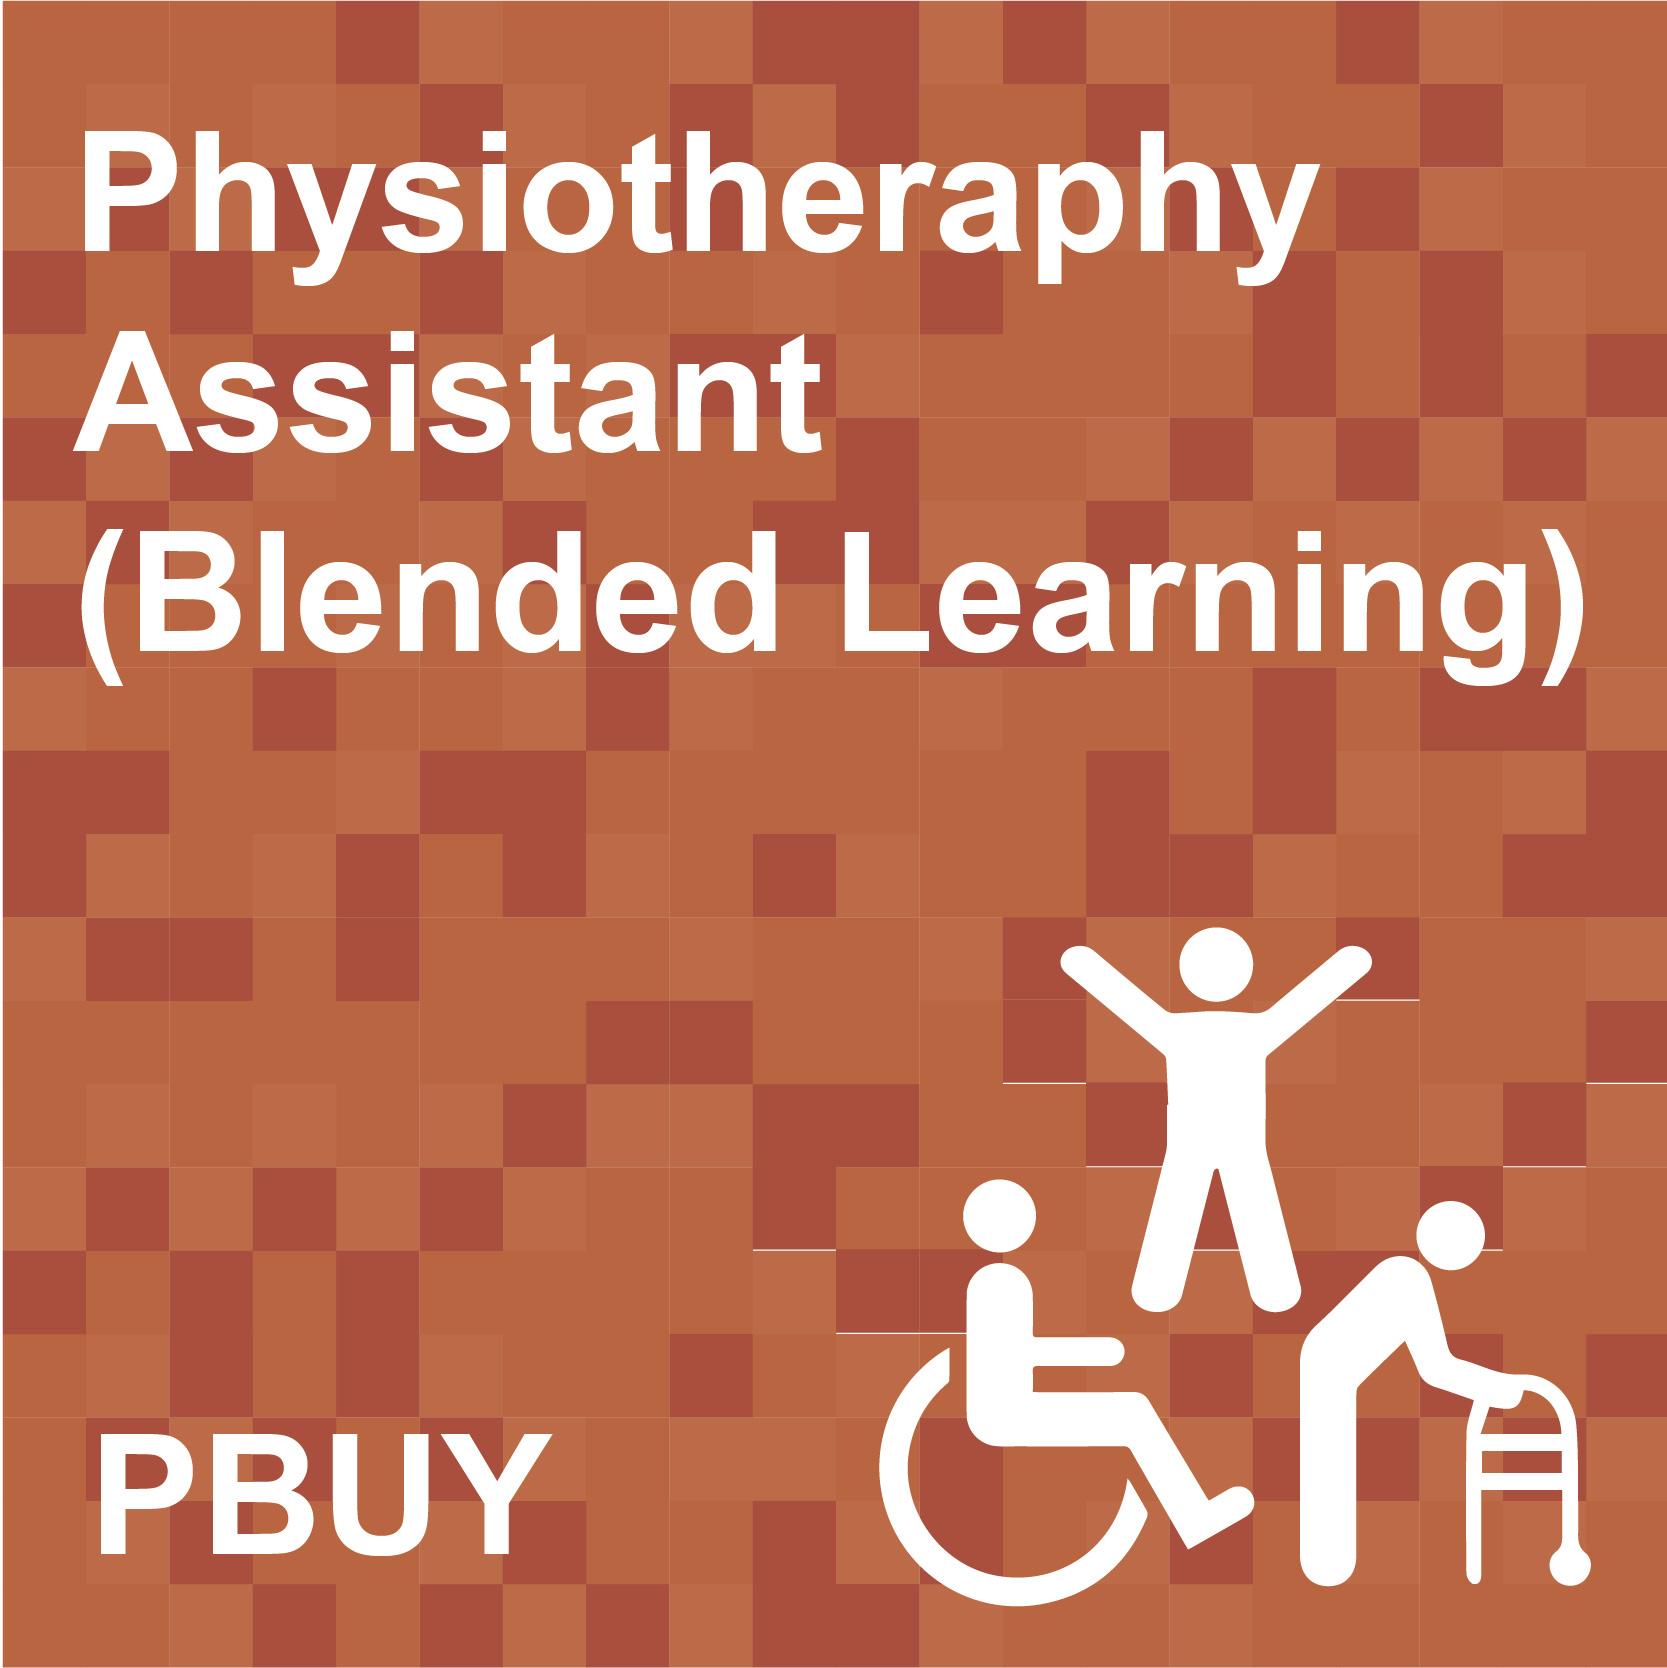 Physiotherapy Assistant Training (Blended Learning) ( Jockey Club Allied Health Assistants Blended Training Programme)